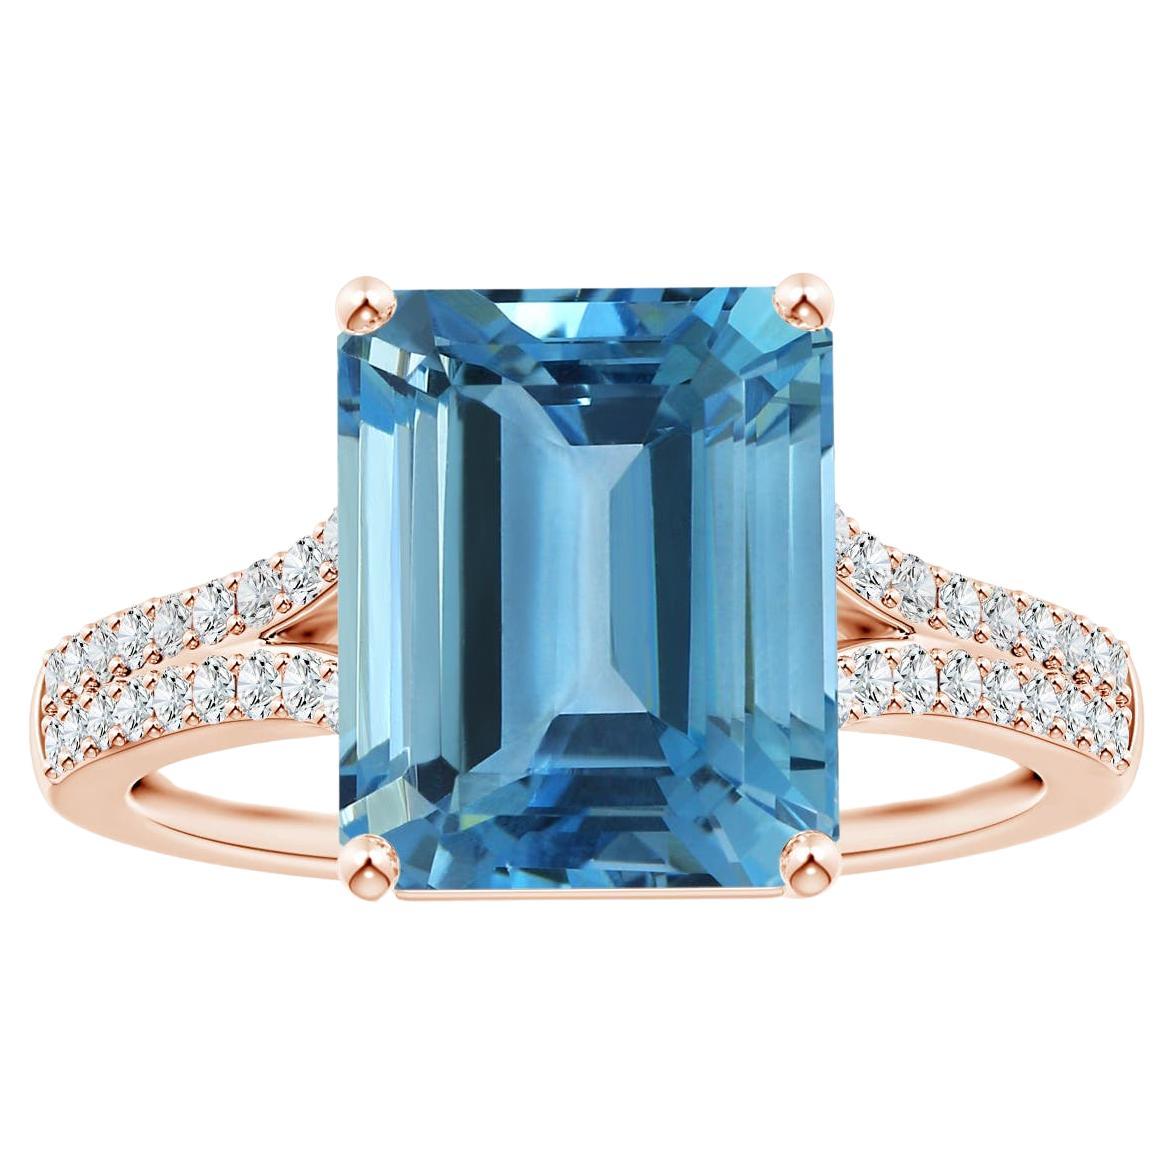 For Sale:  ANGARA GIA Certified 5.04ct Aquamarine Ring in 18K Rose Gold with Diamond